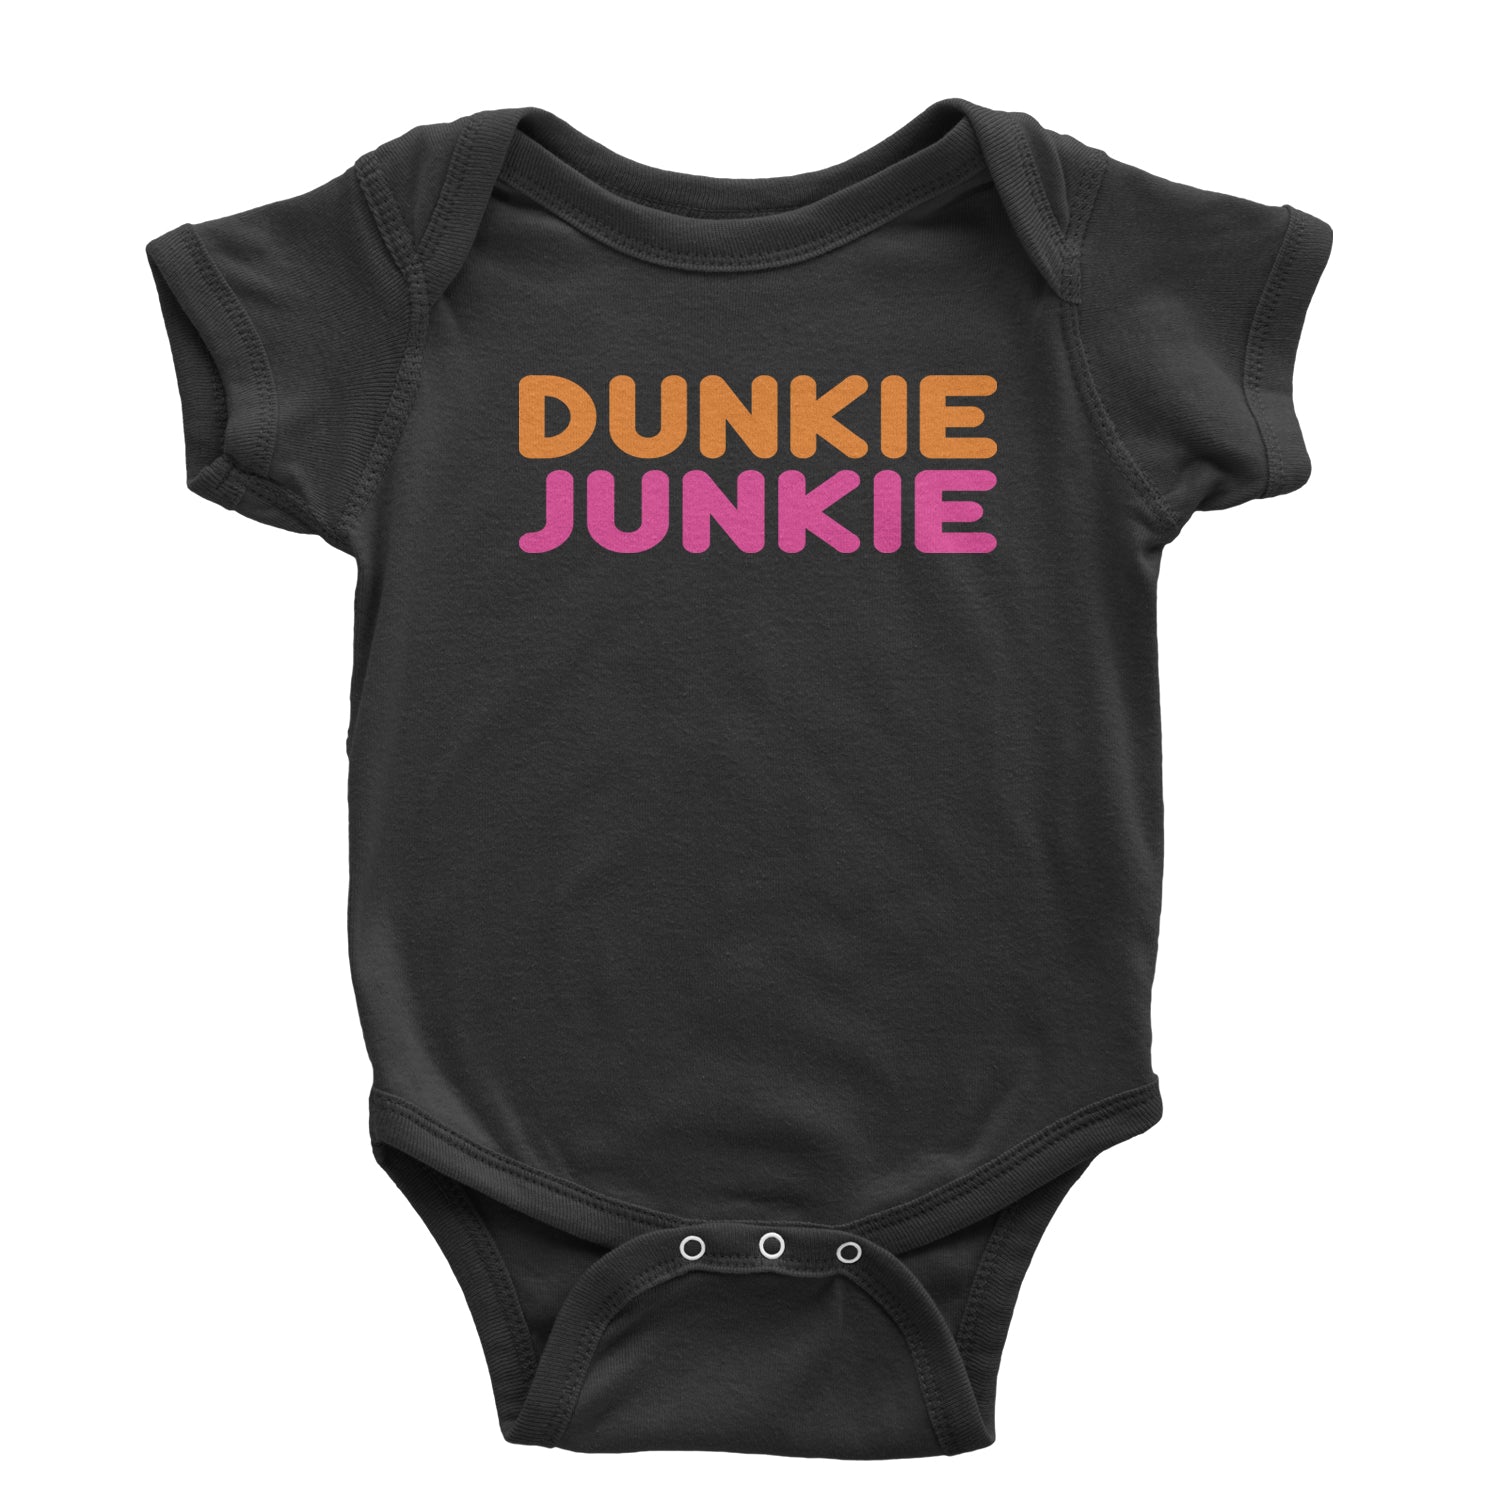 Dunkie Junkie Infant One-Piece Romper Bodysuit and Toddler T-shirt addict, capuccino, coffee, dd, dnkn, dunkin, dunking, latte by Expression Tees